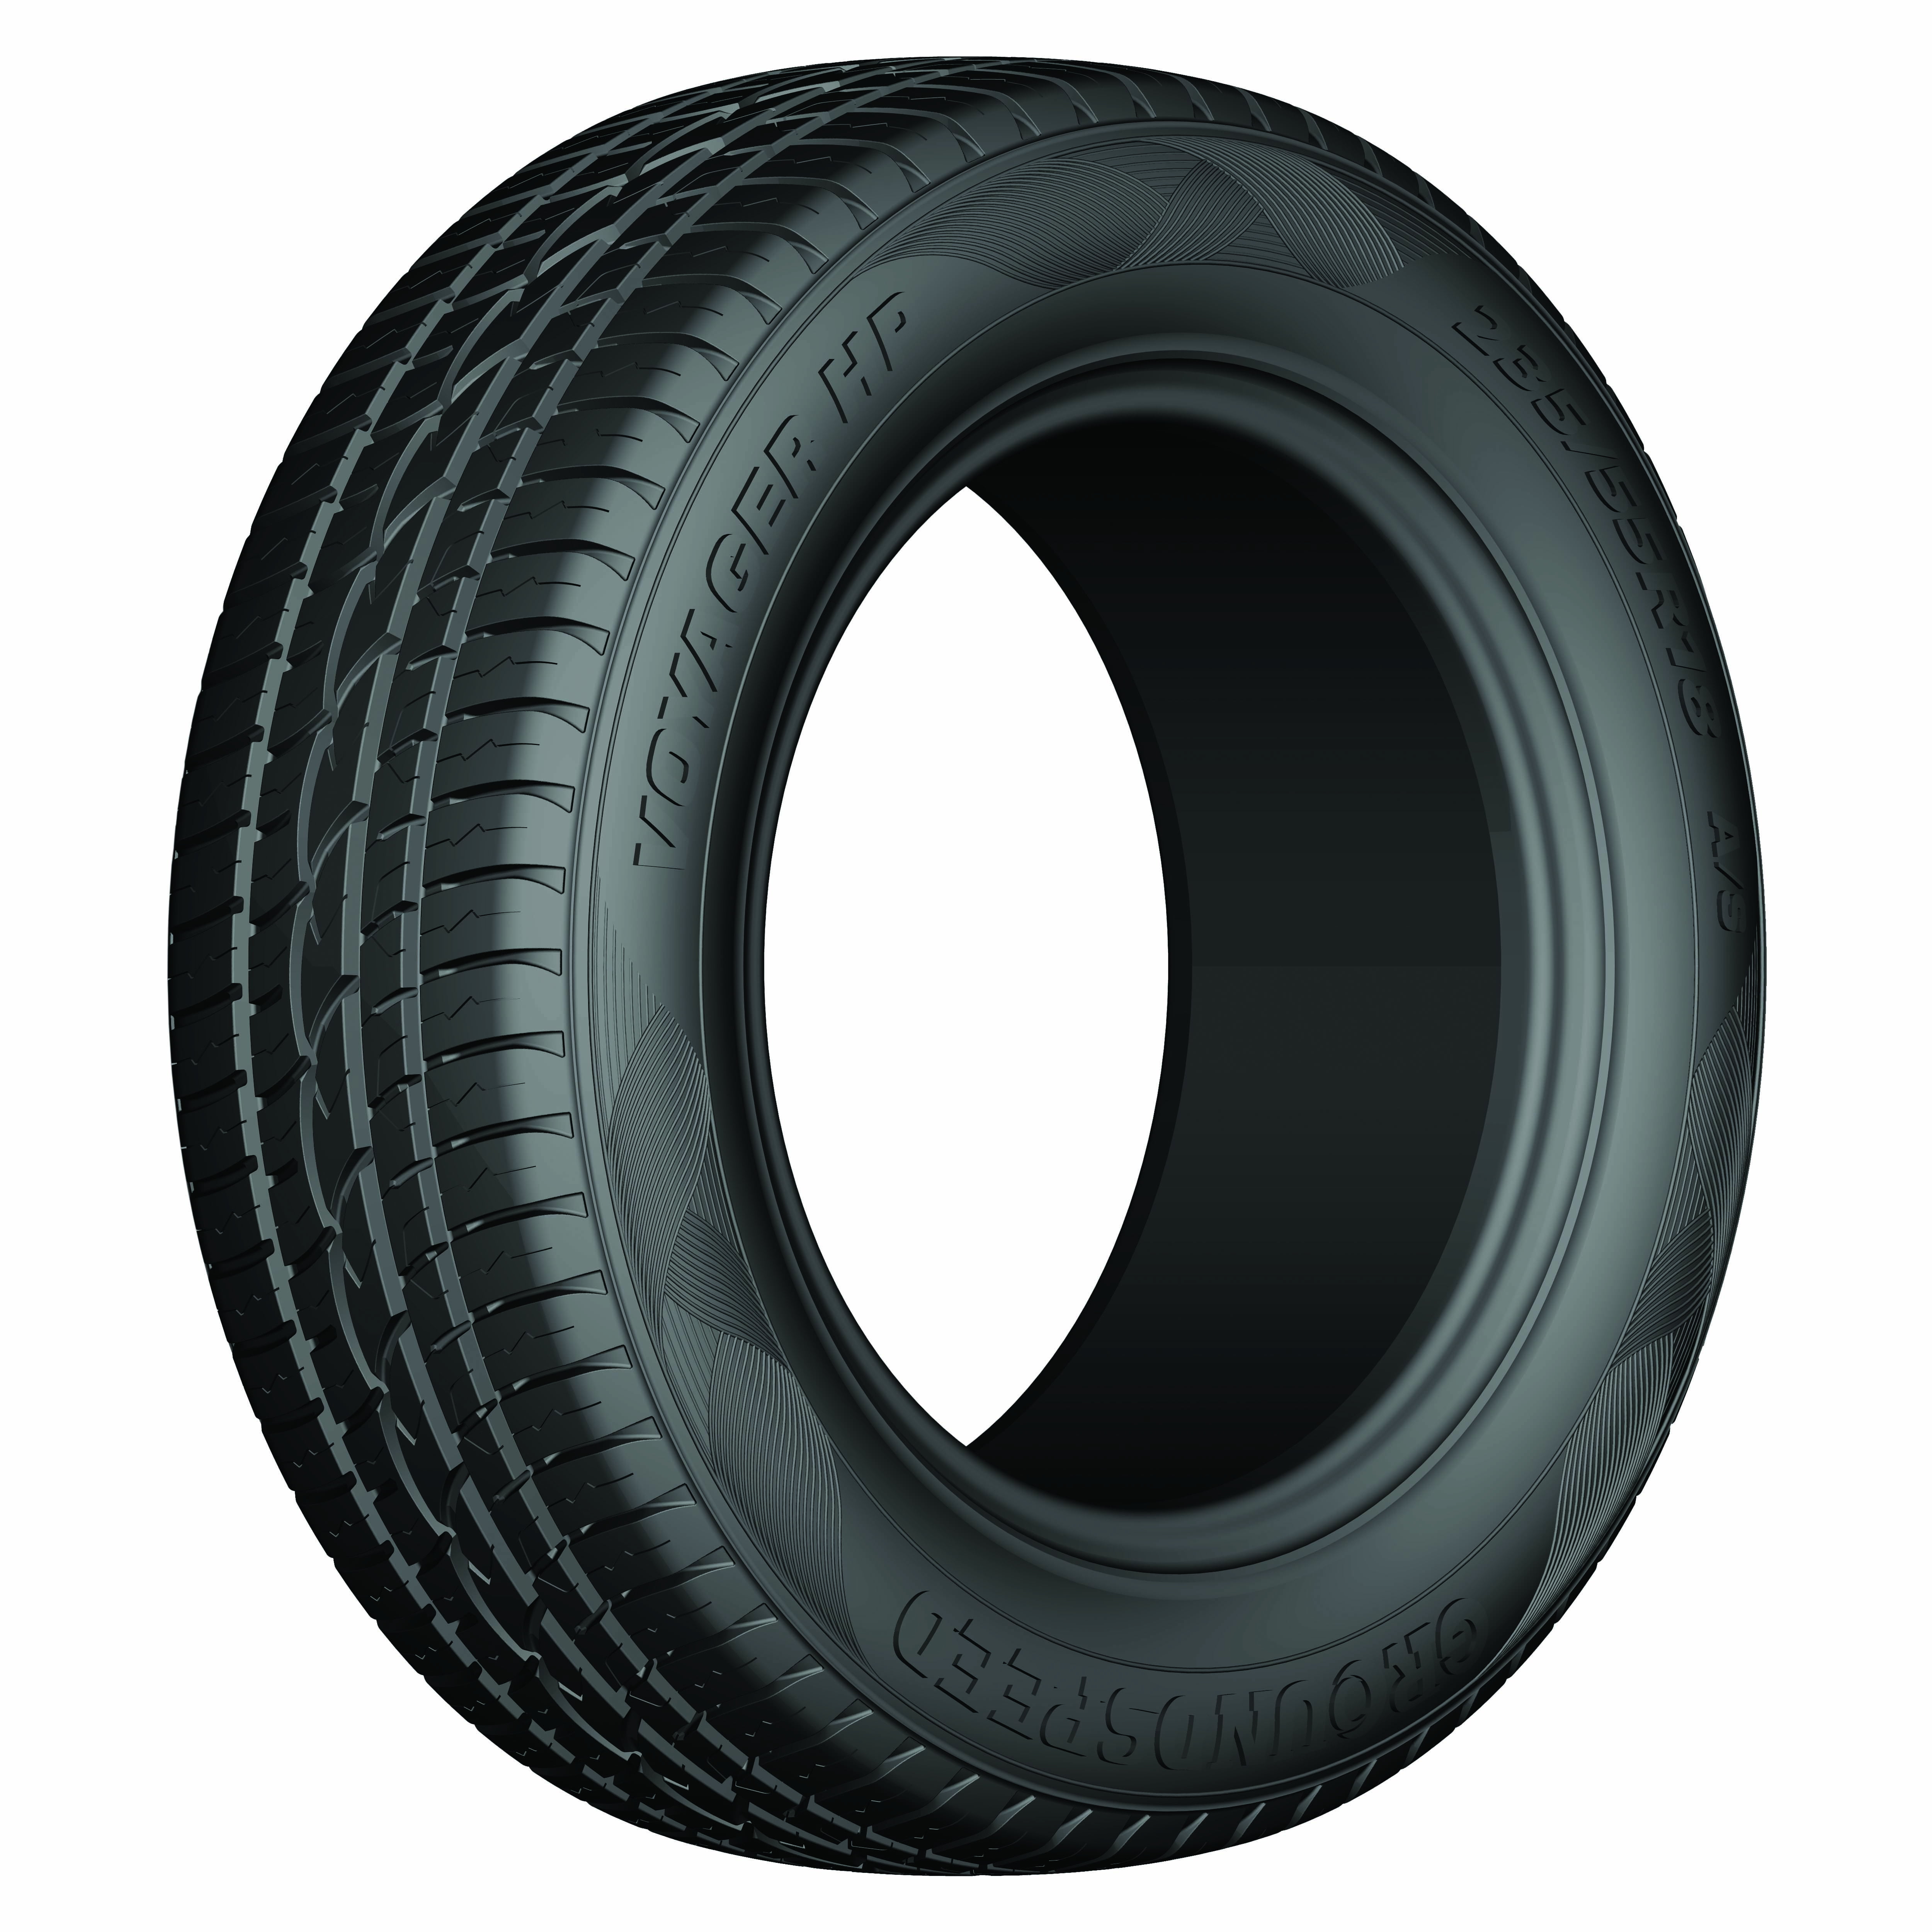 voyager tires